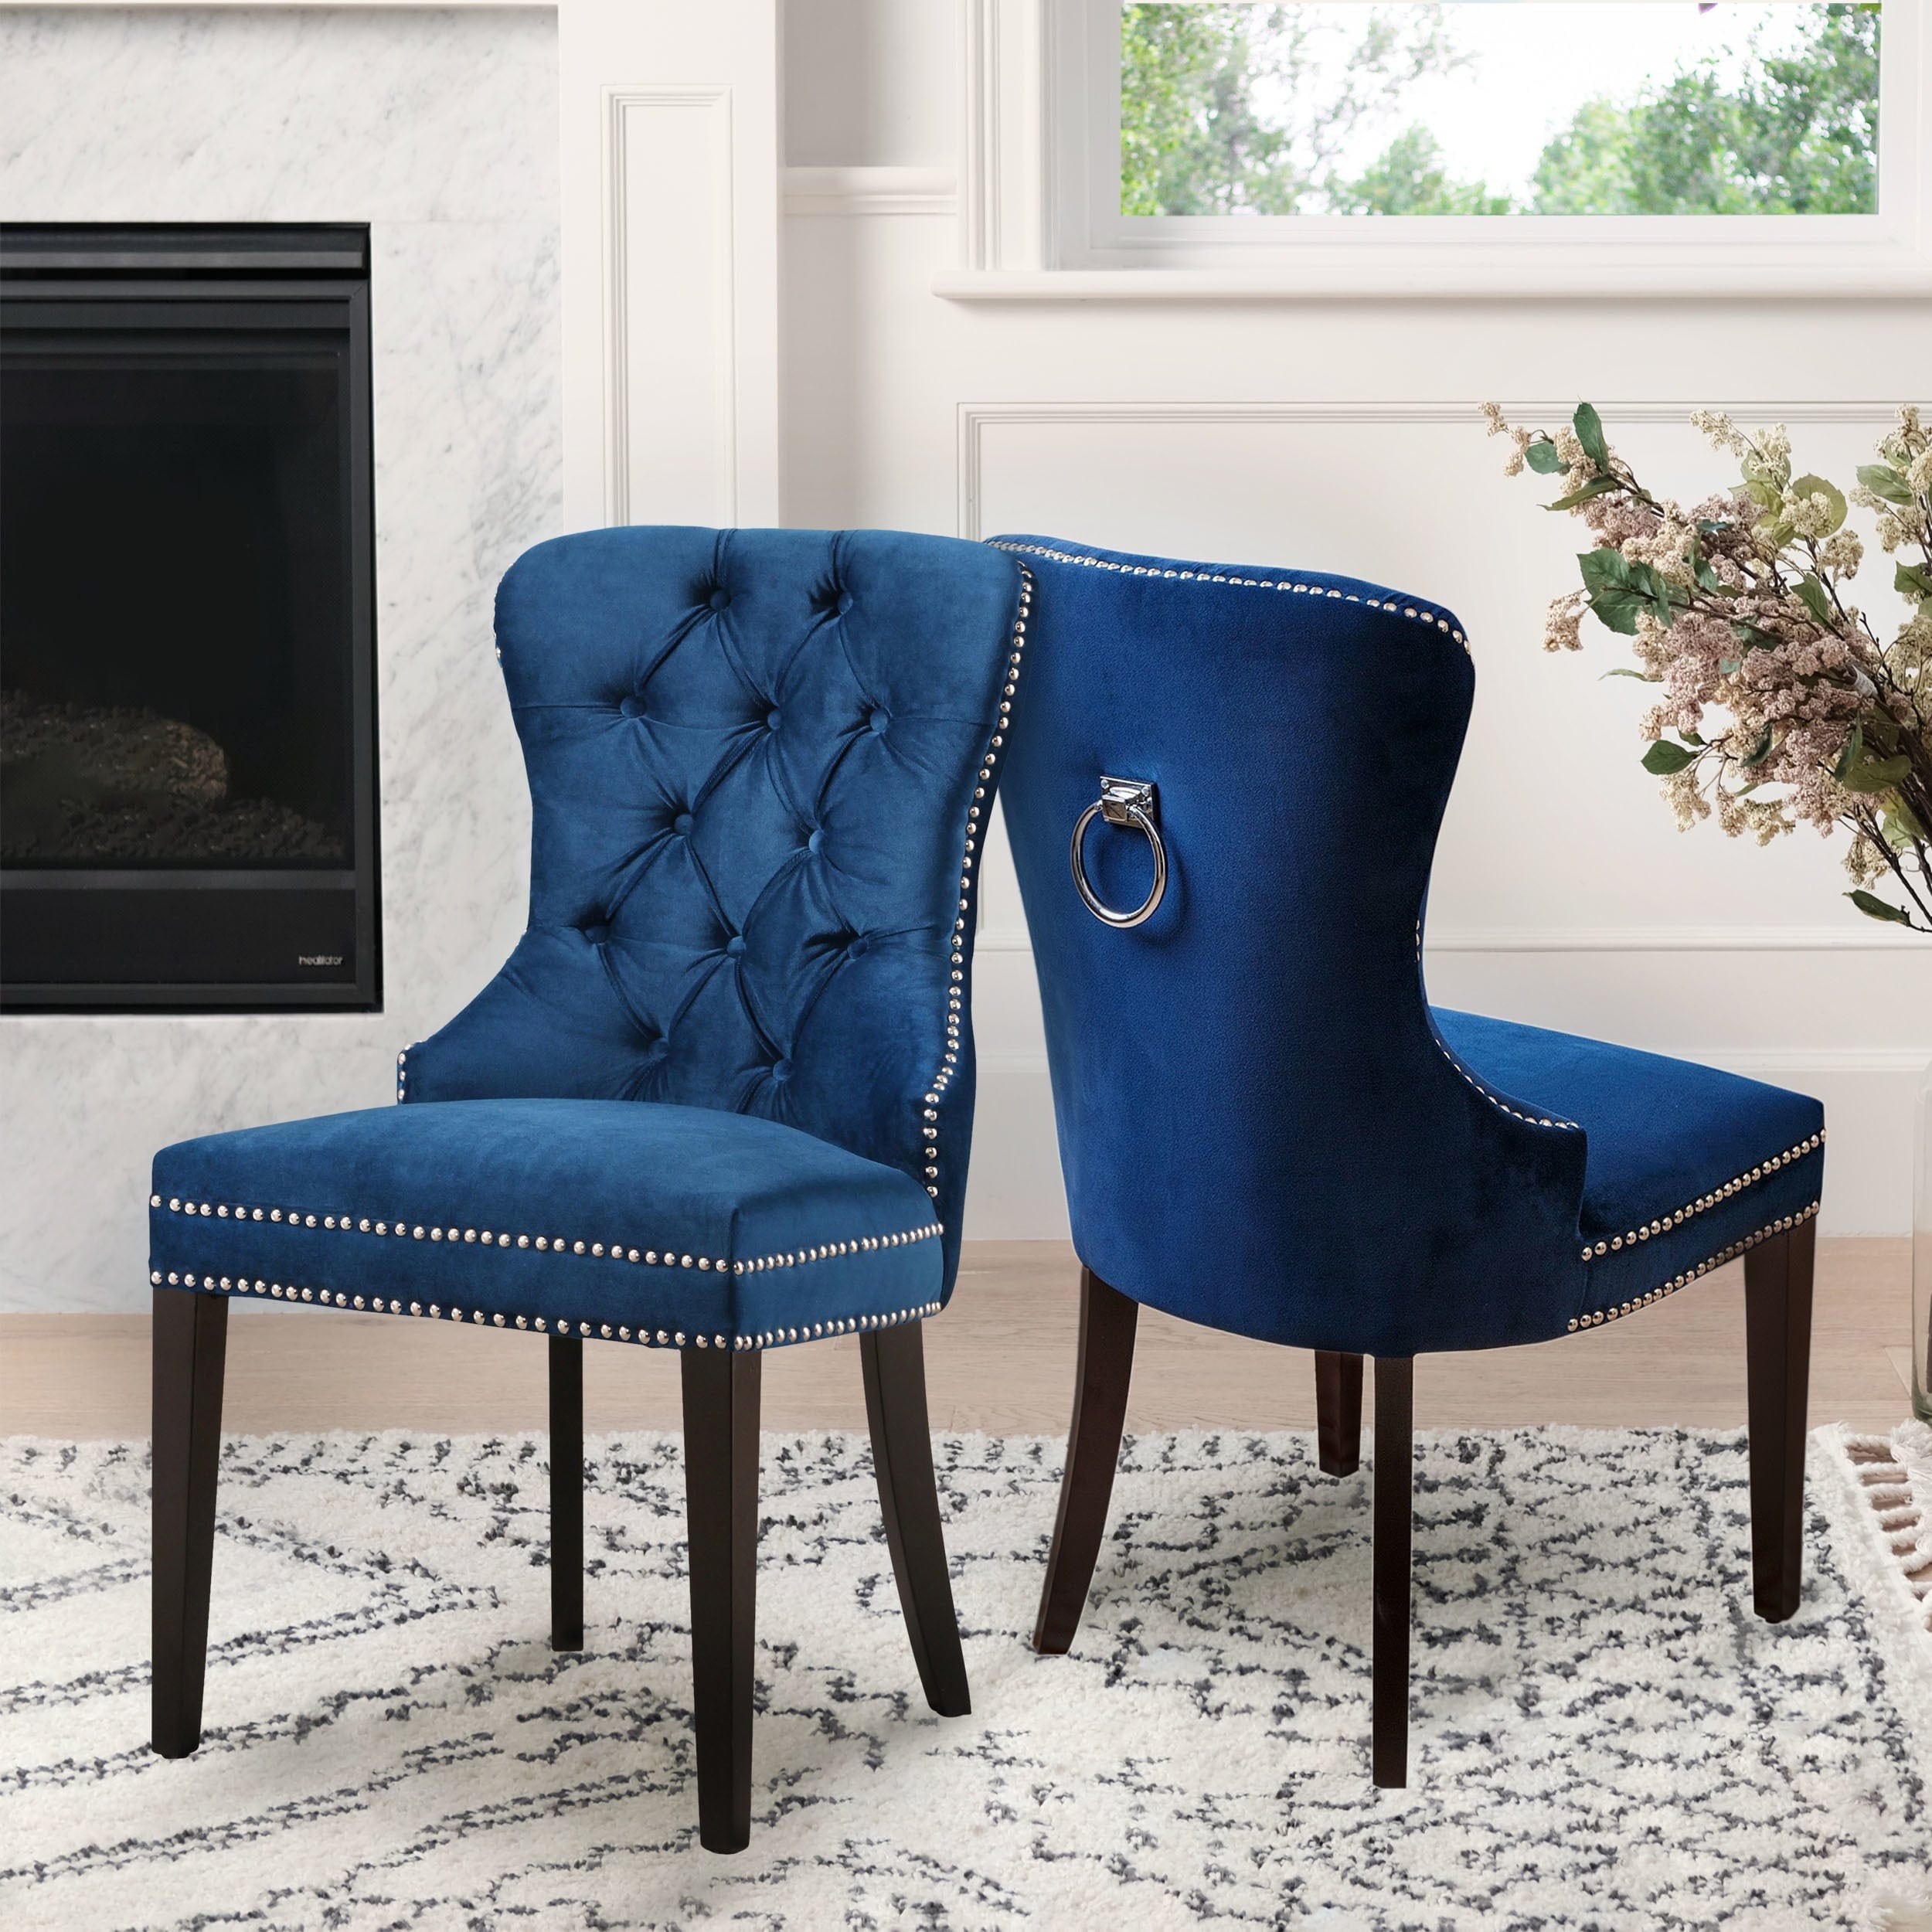 Abbyson Versailles Blue Tufted Dining Chair On Sale Overstock 10855756